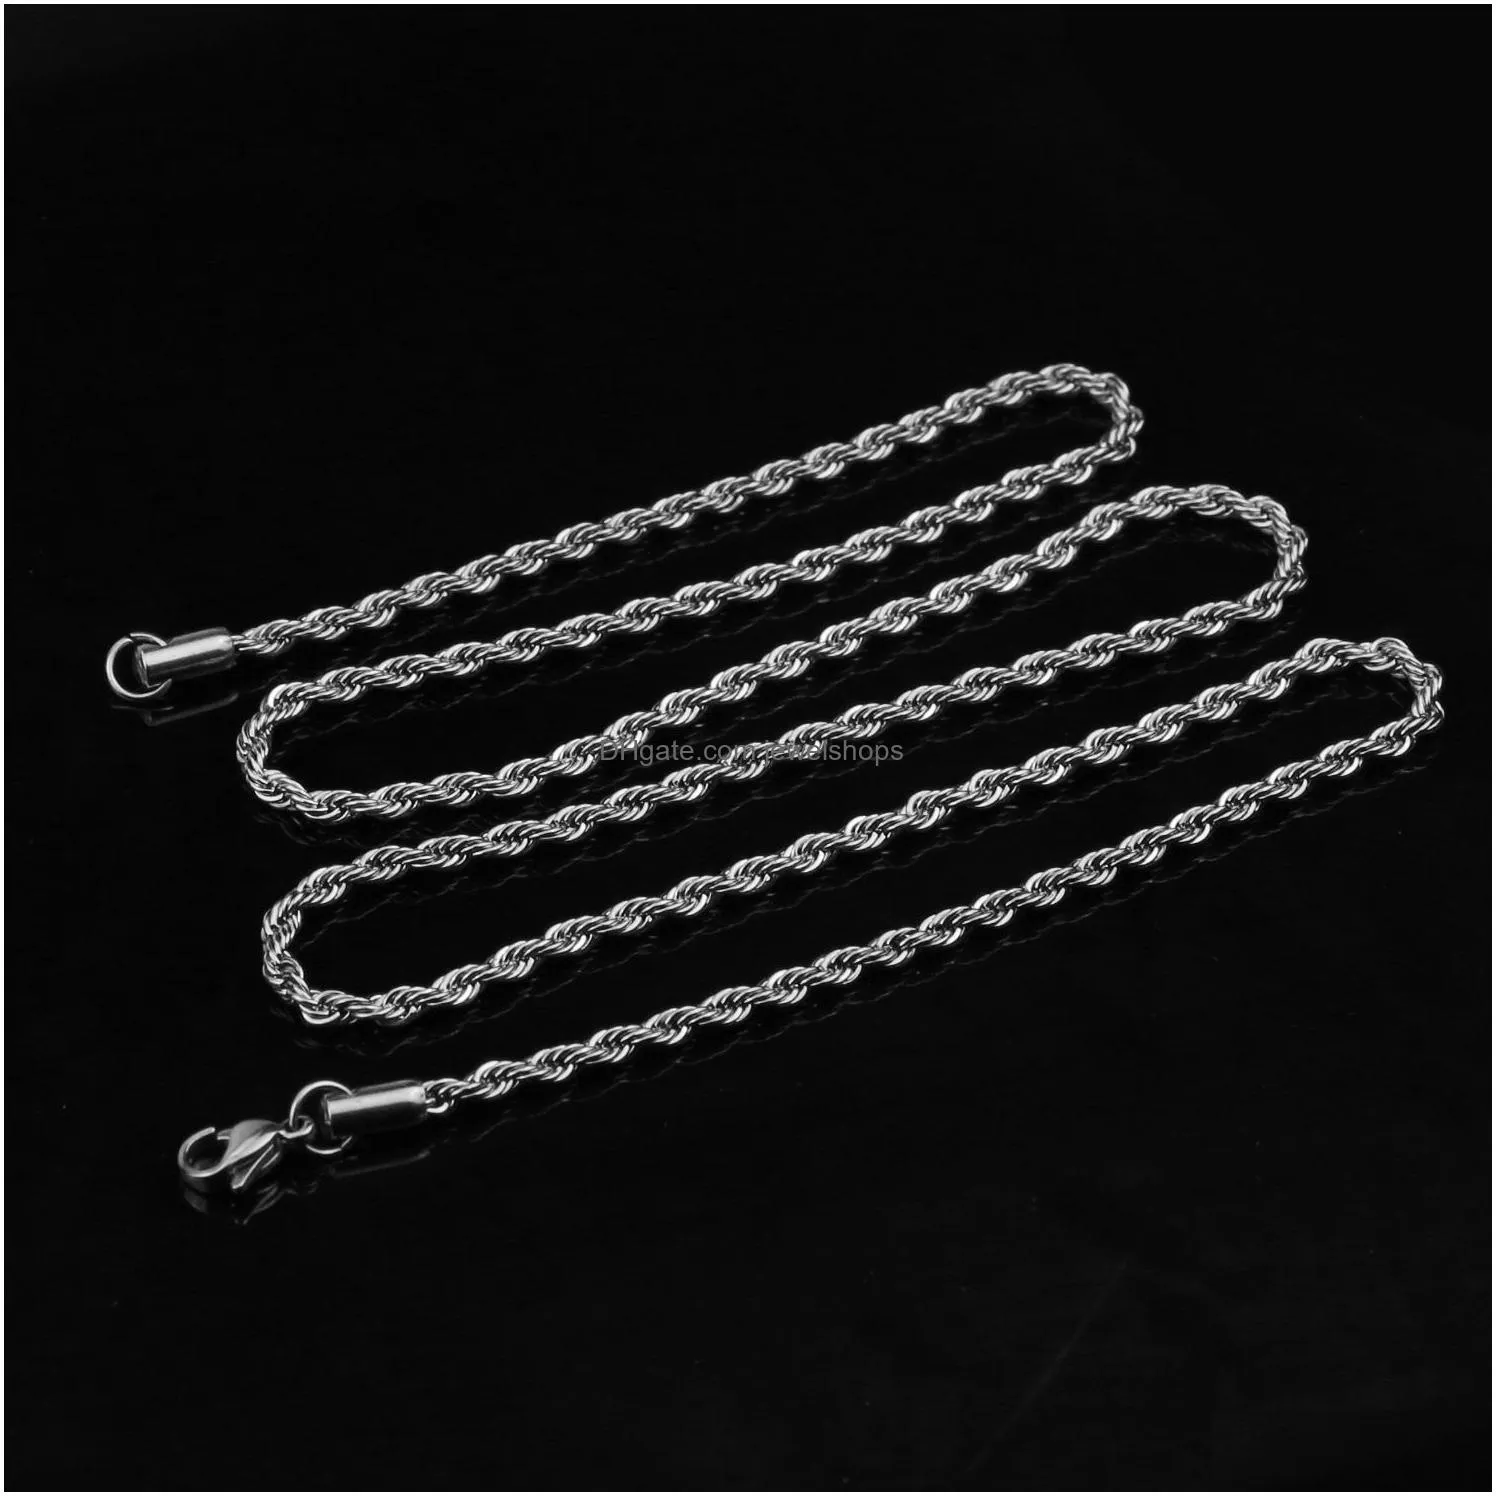 Chains 5-7Mm Stainless Steel Twisted Rope Gold Chain Necklaces For Men Women Hip Hop Titanium Thick Choker Fashion Party Jewelry Gift Dhqb3